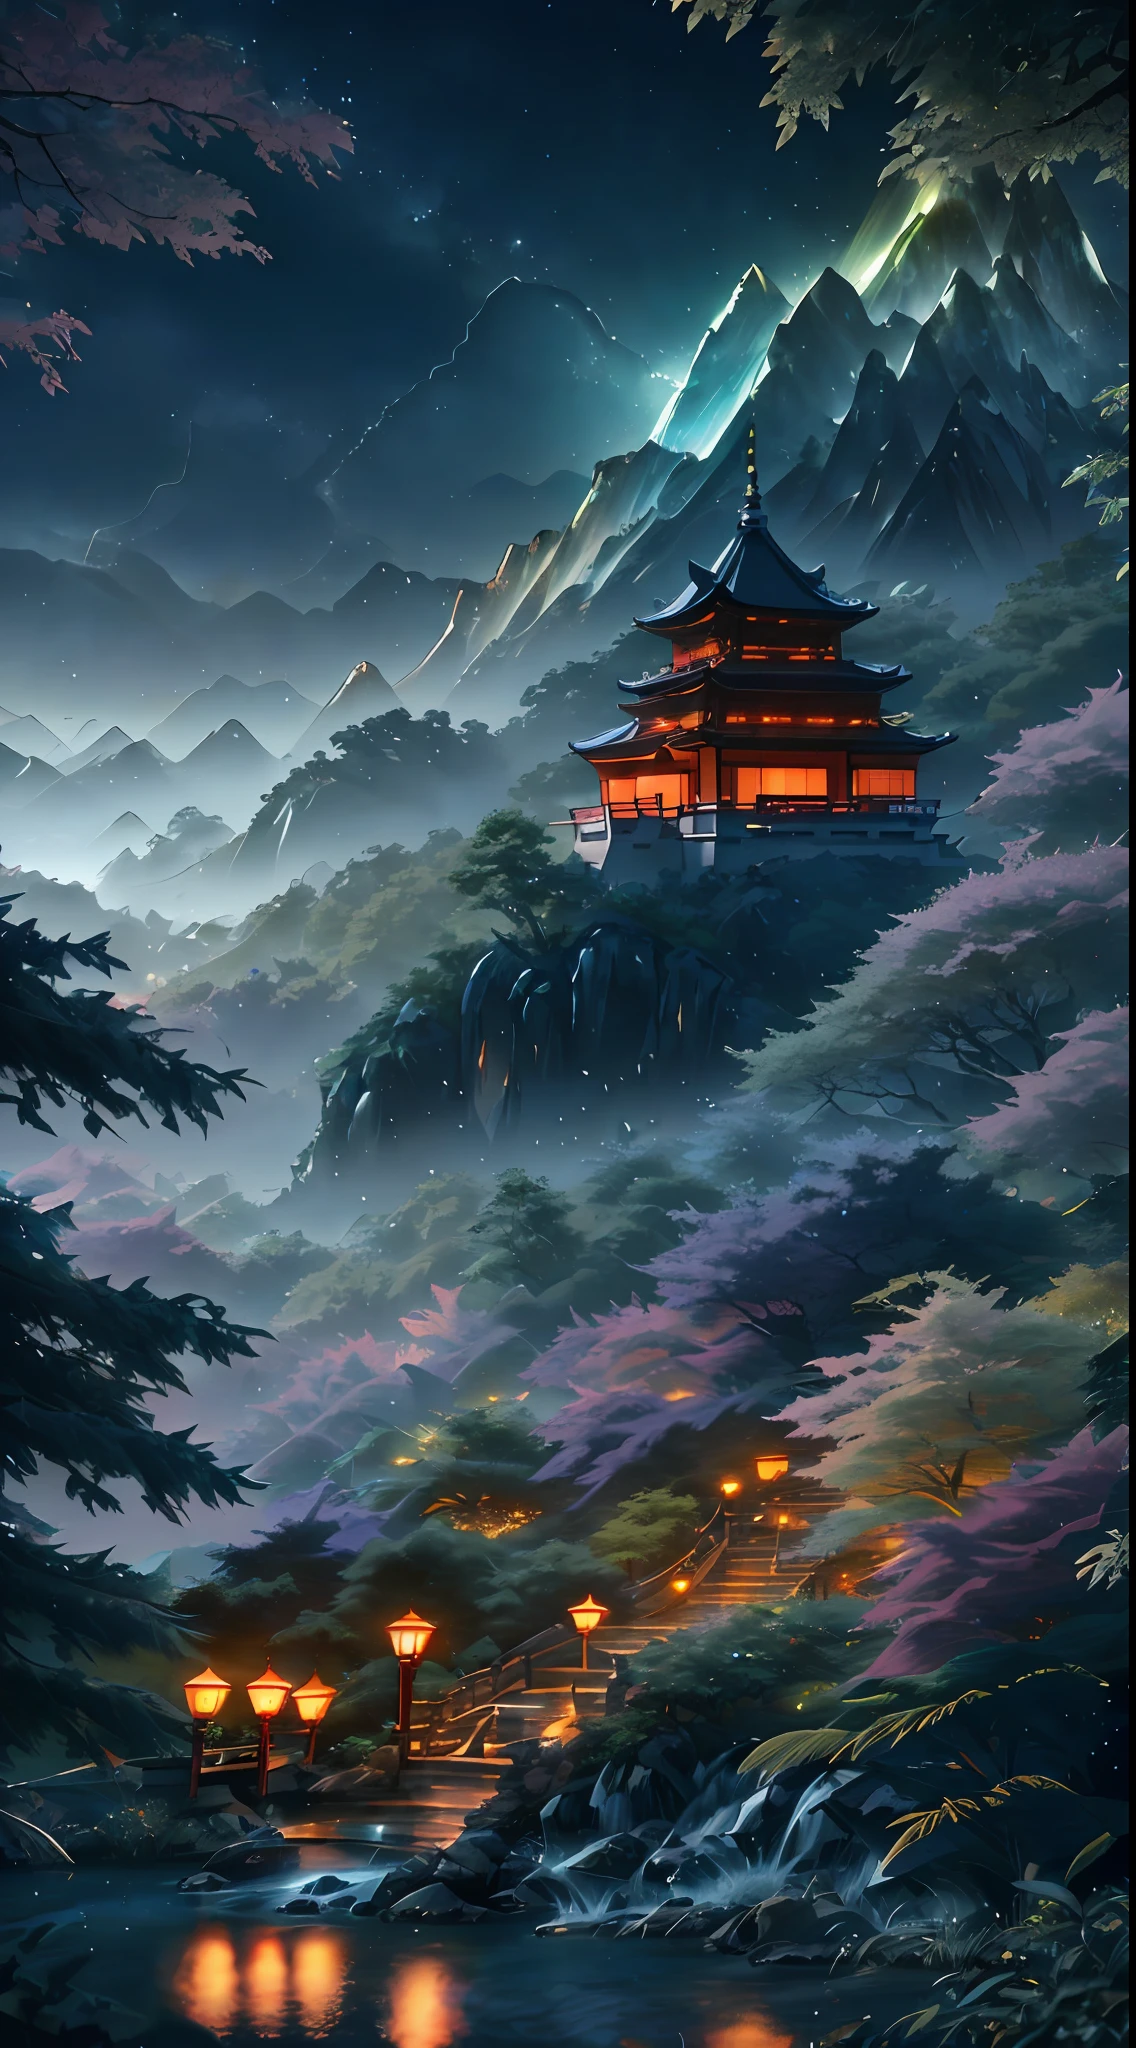 ((diffuse colors)), (( Top view, high angle view, Focal point composition)), Ancient Chinese architecture, cool colors, dark night, moon, garden, bamboo, lake, stone bridge, rockery, arch, corner, tree, running water, landscape, outdoor, waterfall, grass, rock, intense rainfall, thunderstorm, vines all around, giant and wet trees, with glowing leaves in the trees, glowing fireflies and glowing particle effects, a japanese castle at the top of a mountain, masterpiece, best quality, high quality, extremely detailed CG unity 8k wallpaper, oil paiting, award winning photography, Bokeh, Depth of Field, HDR, bloom, ,Photorealistic,extremely detailed, trending on artstation, trending on CGsociety, Intricate, High Detail, dramatic, art by midjourney, volumetric lighting